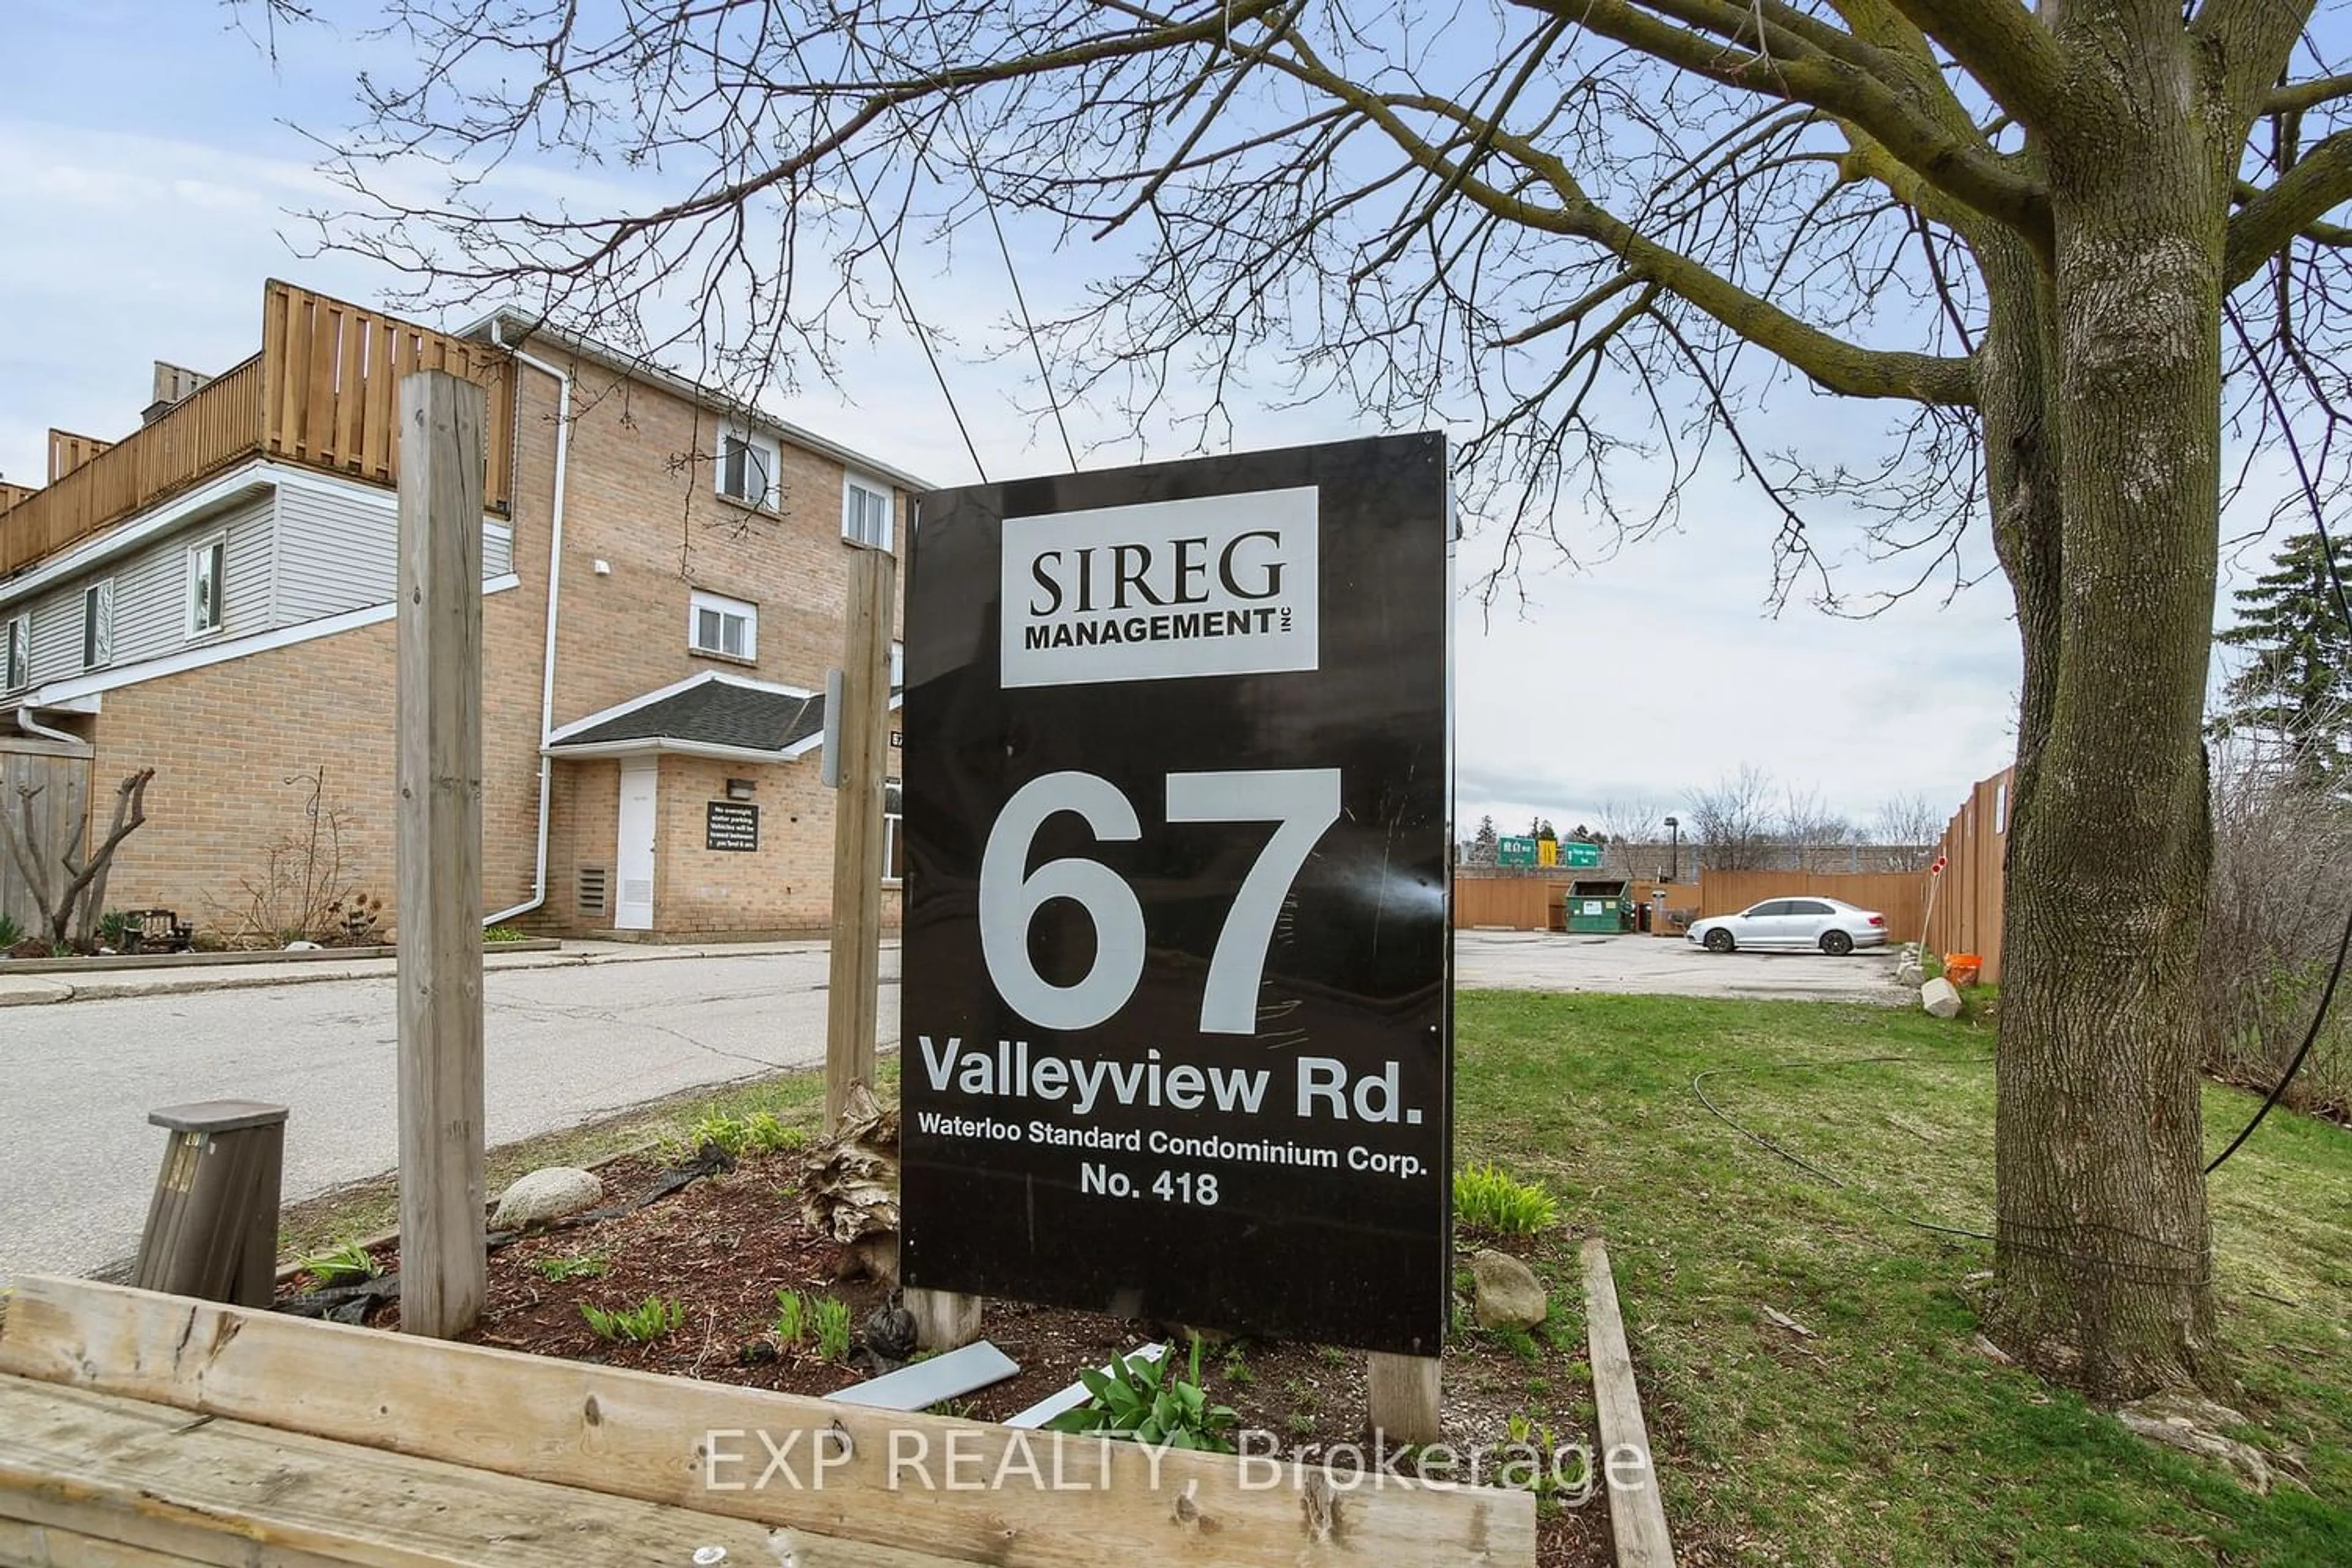 Lakeview for 67 Valleyview Rd #37, Kitchener Ontario N2E 3J1